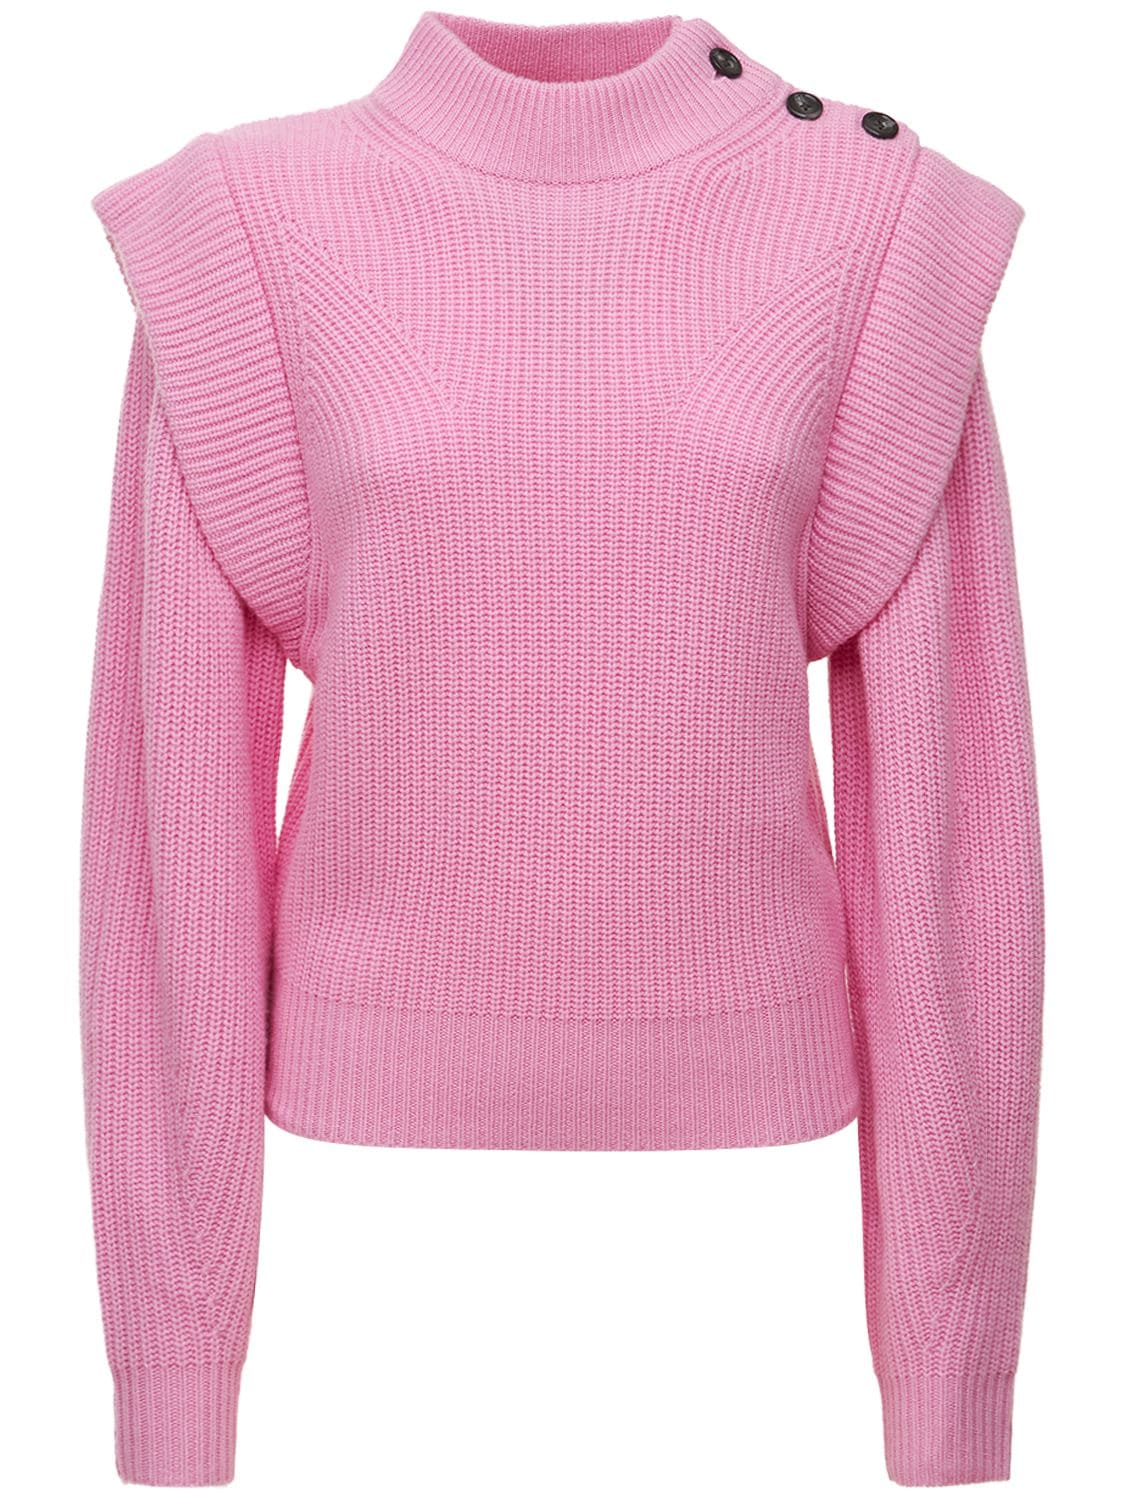 ISABEL MARANT Peggy Wool Blend Knit Sweater